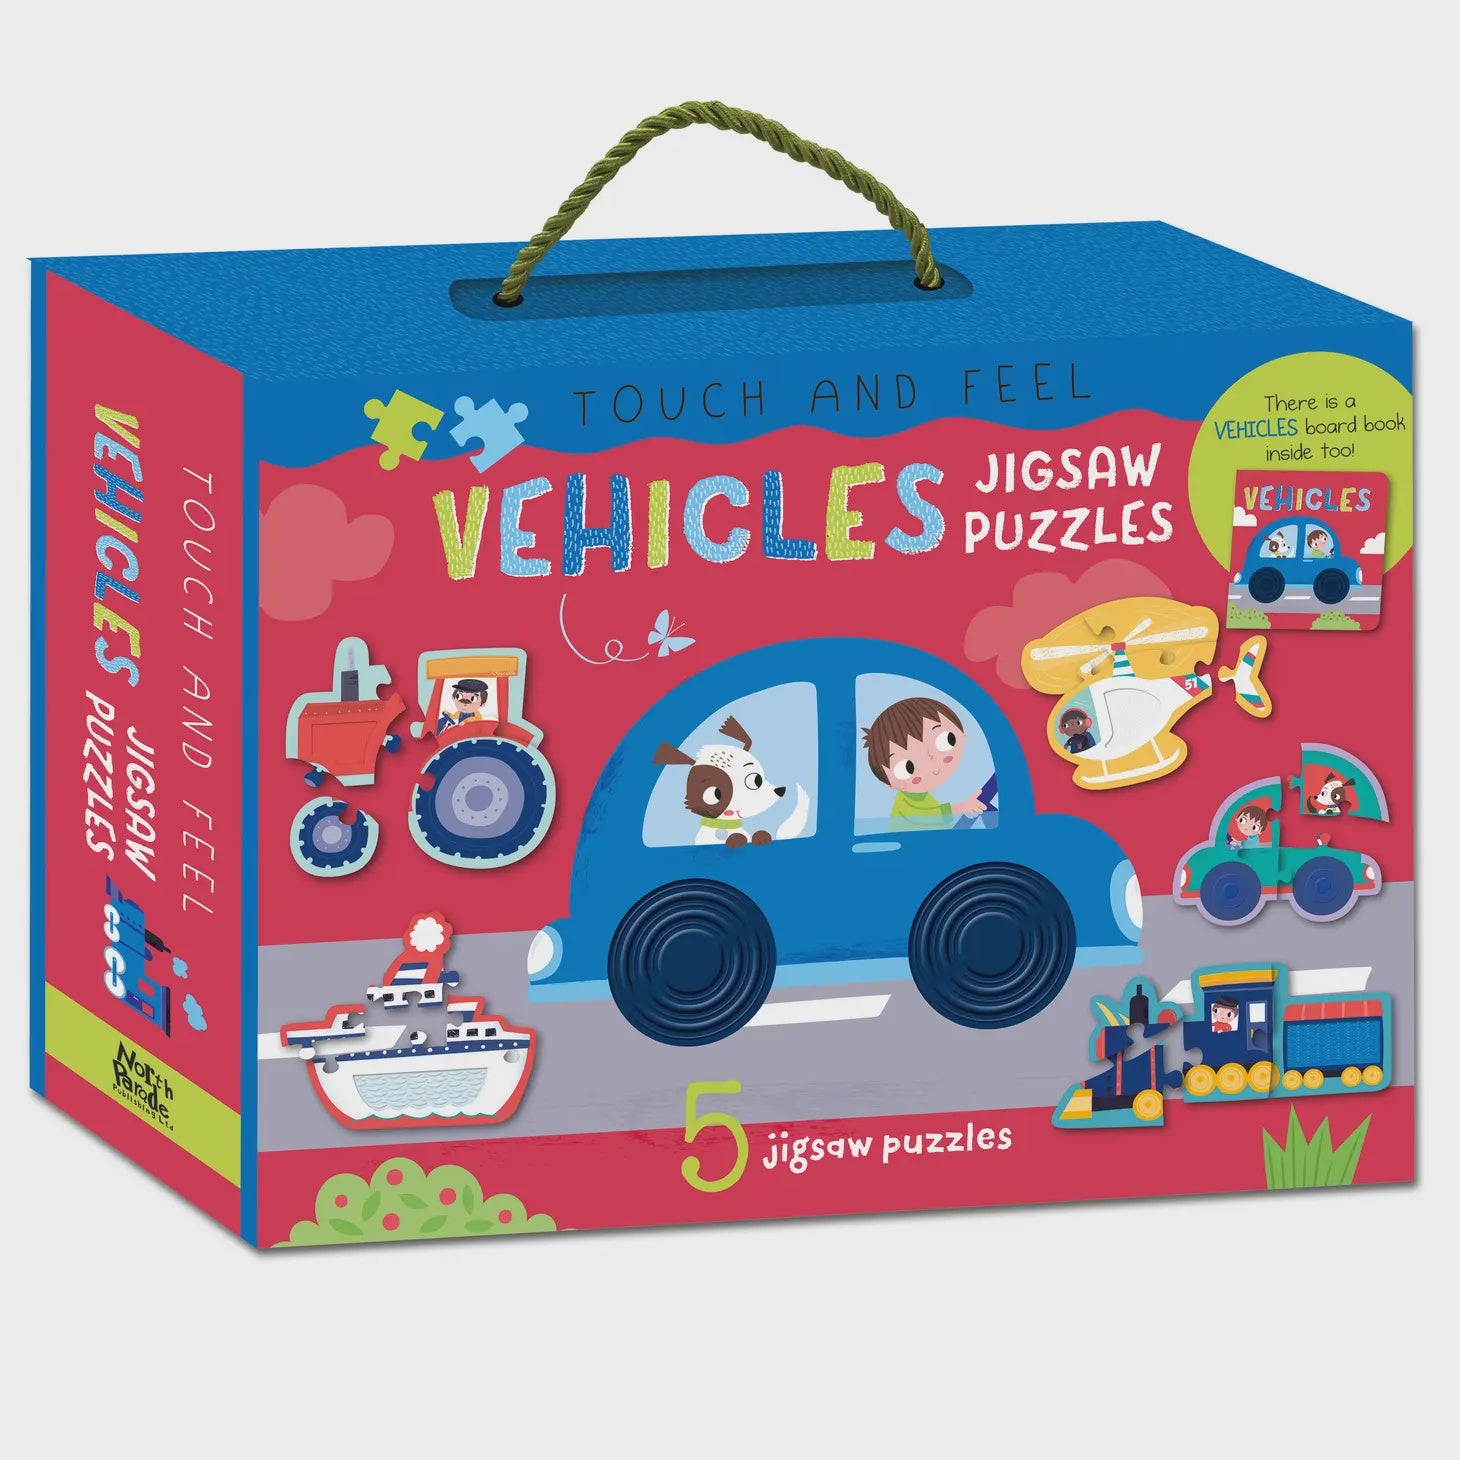 Touch & Feel Vehicle's Jigsaw Puzzle's